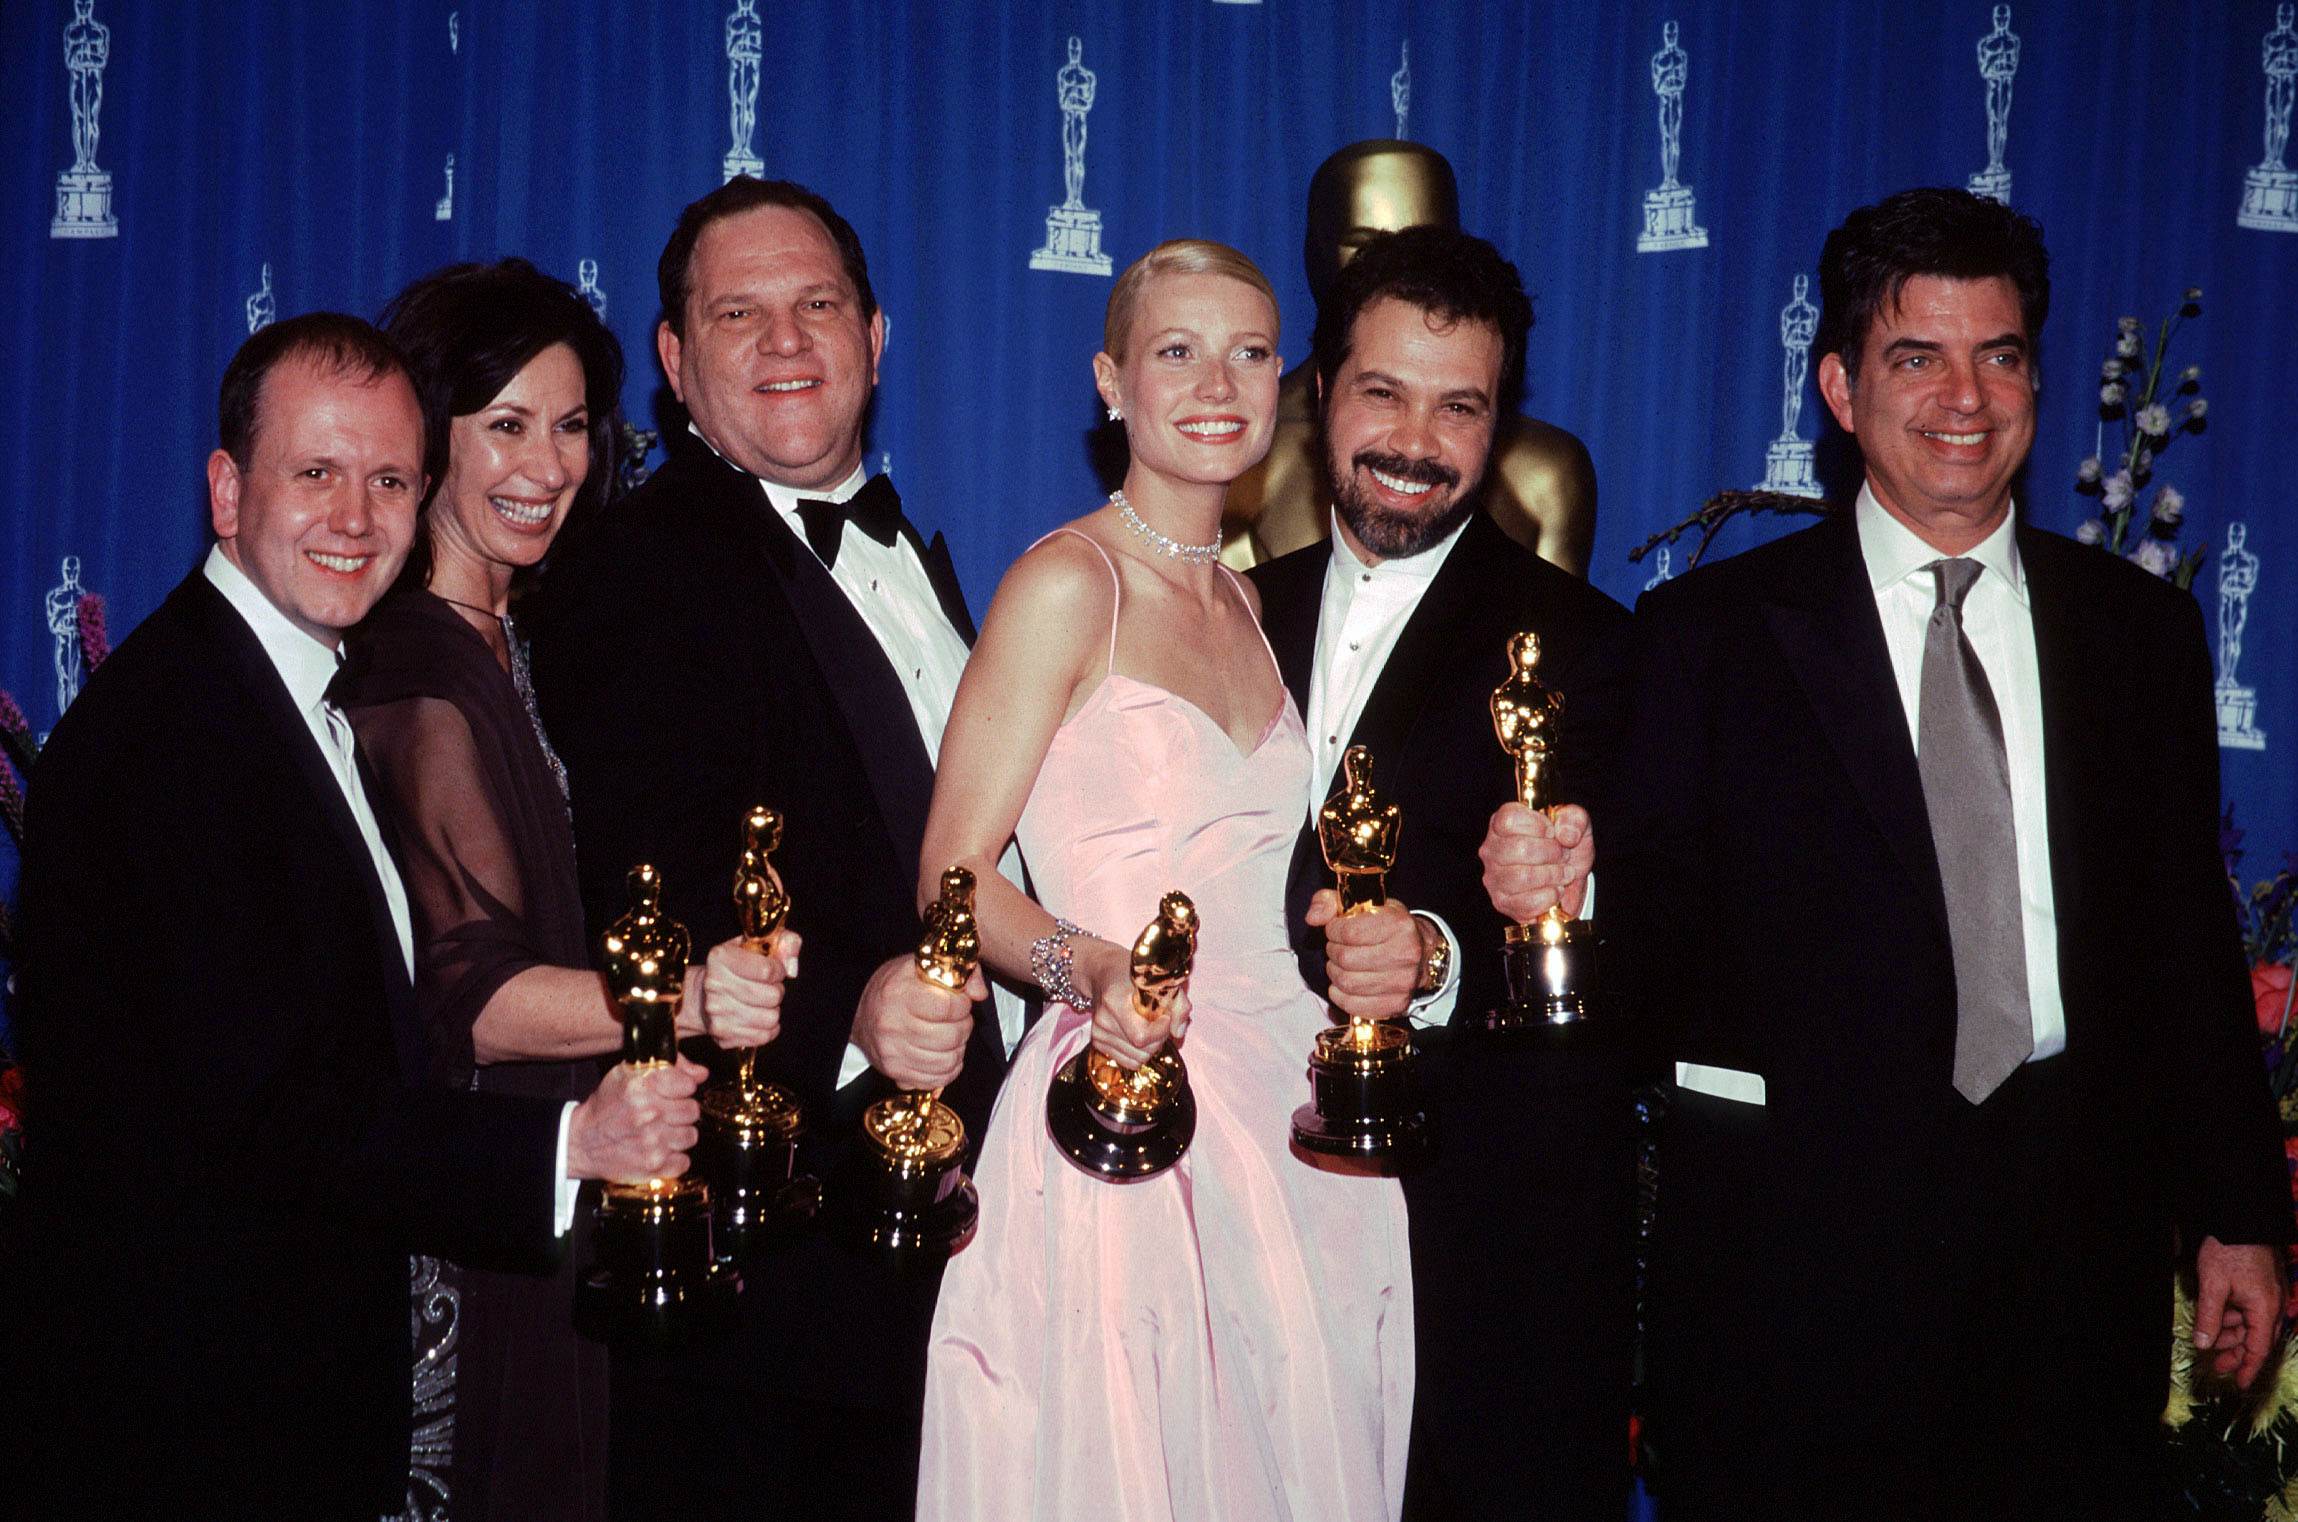 From (L-R) David Parfitt, Donna Gigliotti, Harvey Weinstein, Gwyneth Paltrow, Edward Zwick, and Mark Norman pose in the pressroom at the 71st Annual Academy Awards on March 21, 1999 in Los Angeles, California. | Source: Getty Images